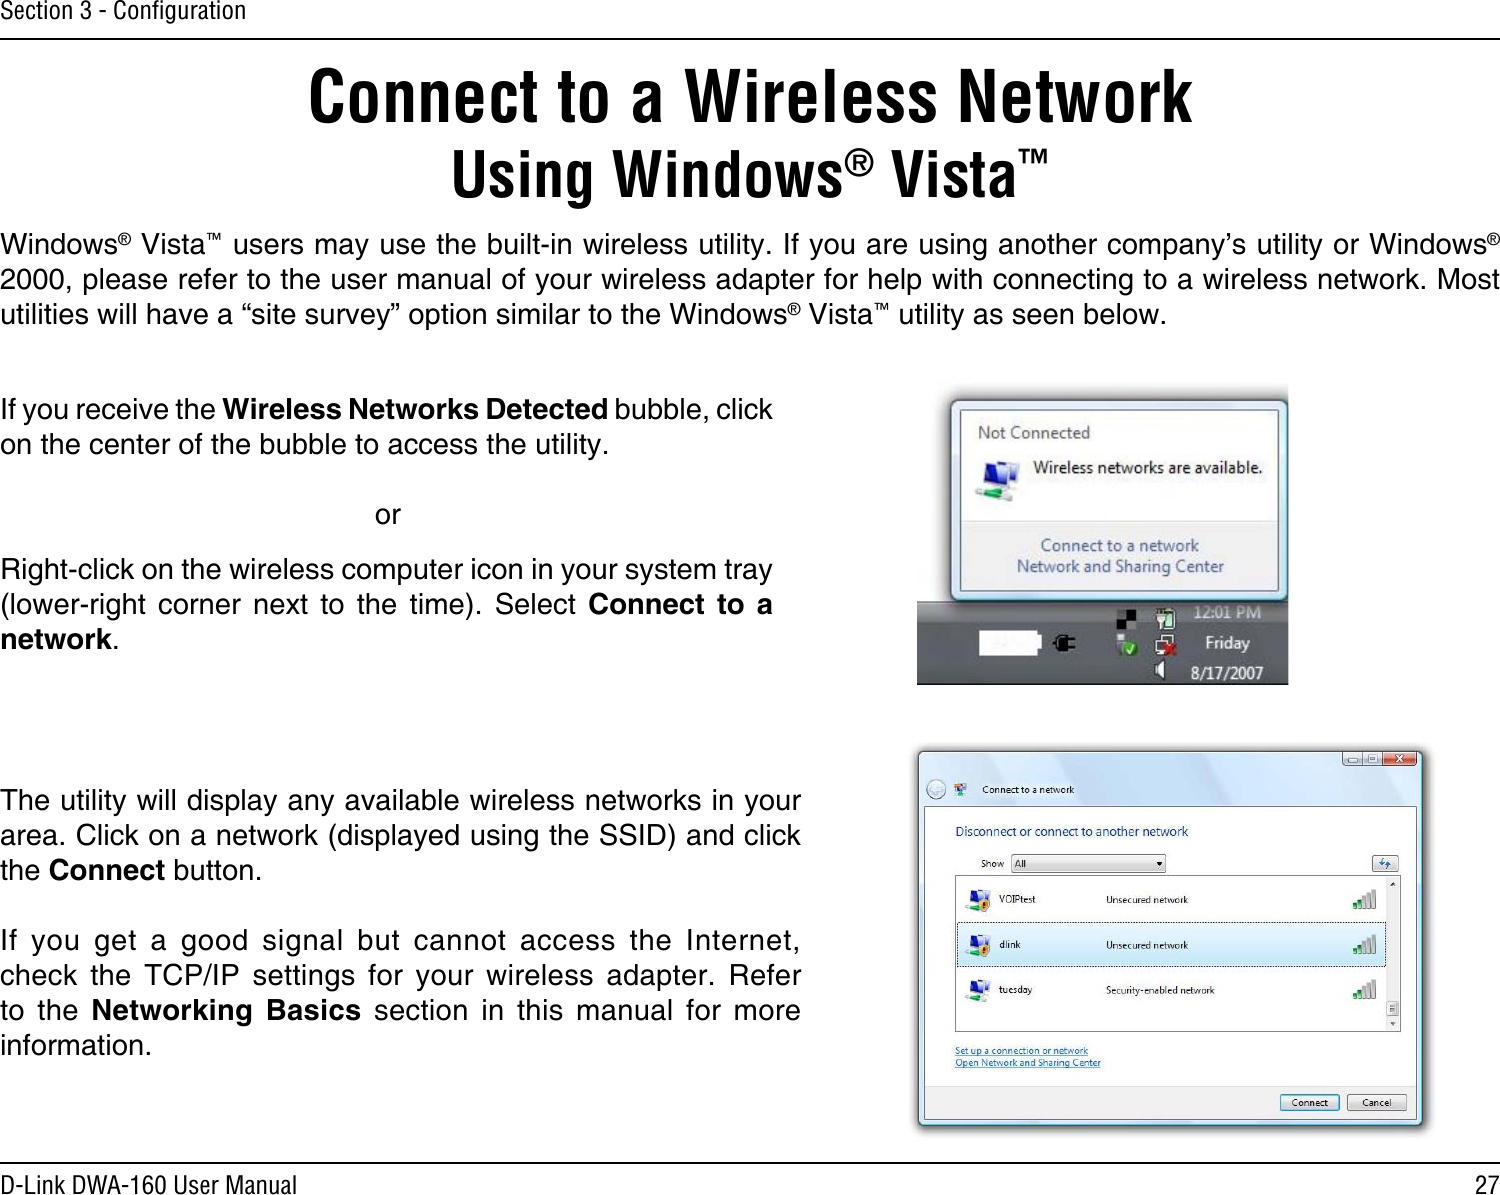 27D-Link DWA-160 User ManualSection 3 - ConﬁgurationConnect to a Wireless NetworkUsing Windows® Vista™Windows® Vista™ users may use the built-in wireless utility. If you are using another company’s utility or Windows® 2000, please refer to the user manual of your wireless adapter for help with connecting to a wireless network. Most utilities will have a “site survey” option similar to the Windows® Vista™ utility as seen below.Right-click on the wireless computer icon in your system tray (lower-right  corner  next  to  the  time).  Select  Connect  to  a network.If you receive the Wireless Networks Detected bubble, click on the center of the bubble to access the utility.     orThe utility will display any available wireless networks in your area. Click on a network (displayed using the SSID) and click the Connect button.If  you  get  a  good  signal  but  cannot  access  the  Internet, check  the  TCP/IP  settings  for  your  wireless  adapter.  Refer to  the  Networking  Basics  section  in  this  manual  for  more information.